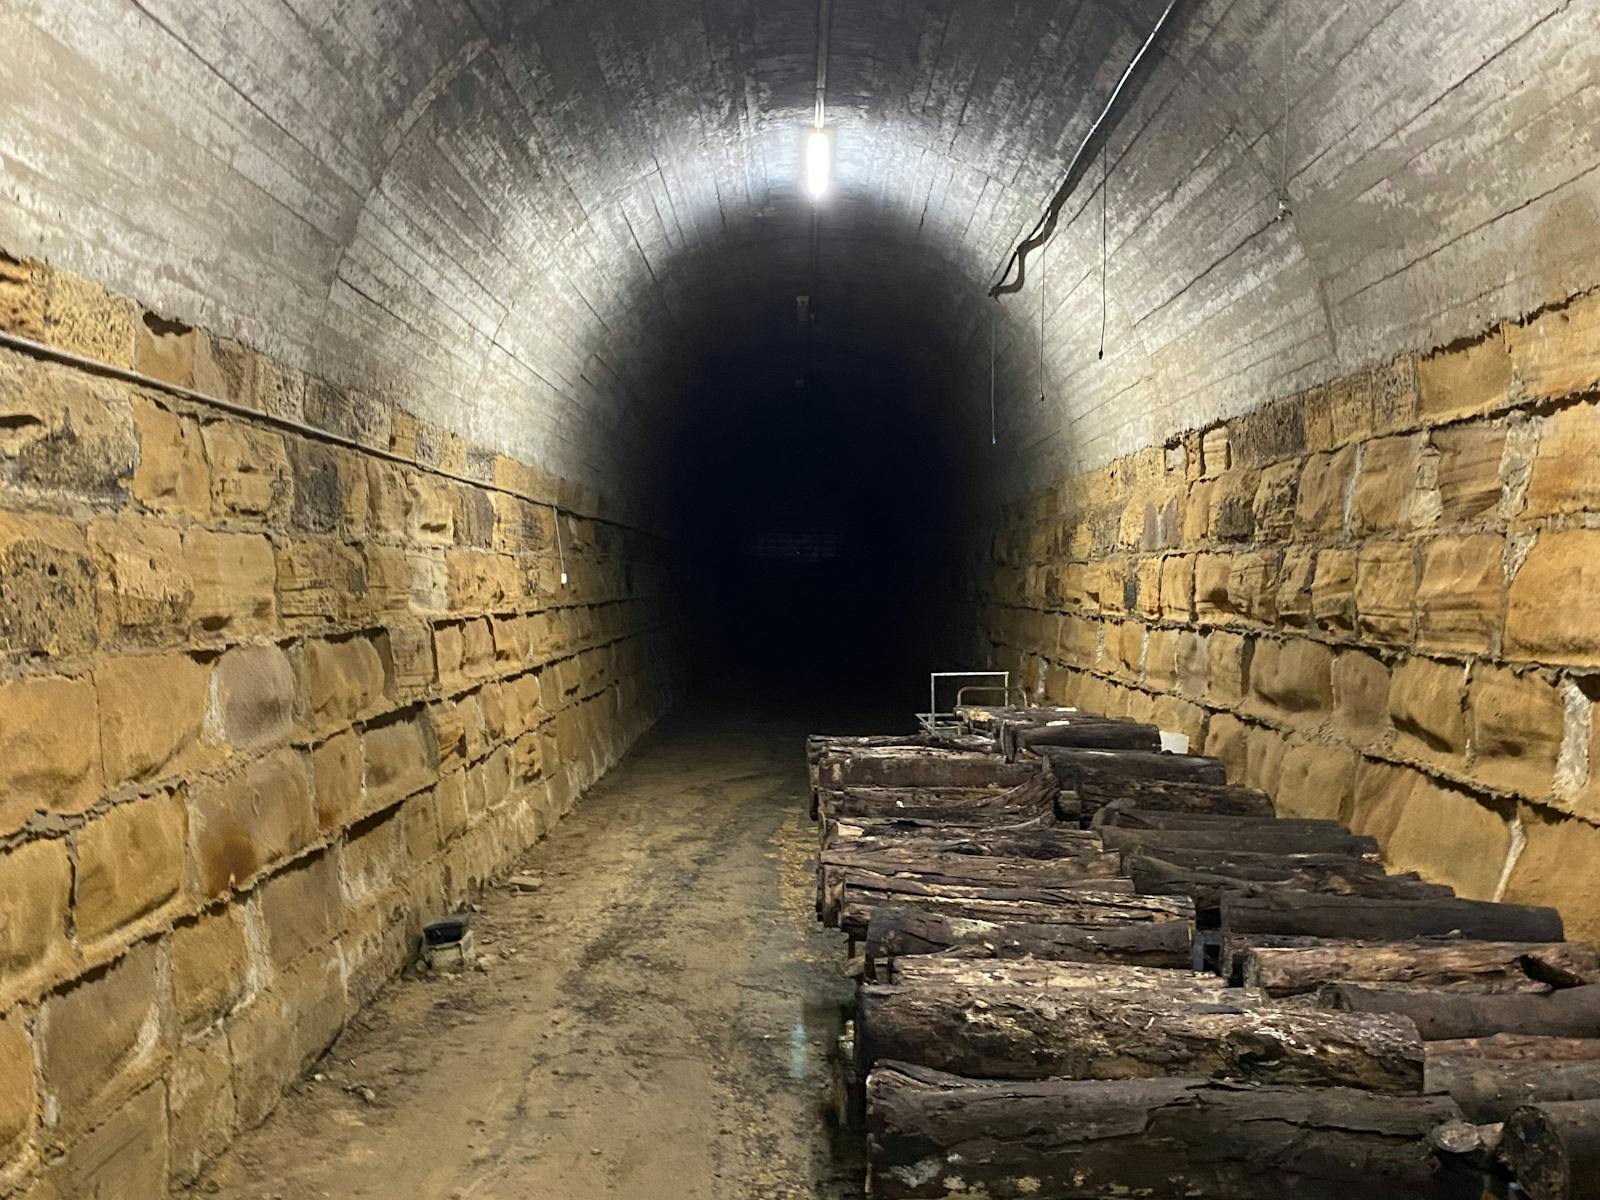 The back section of the tunnel